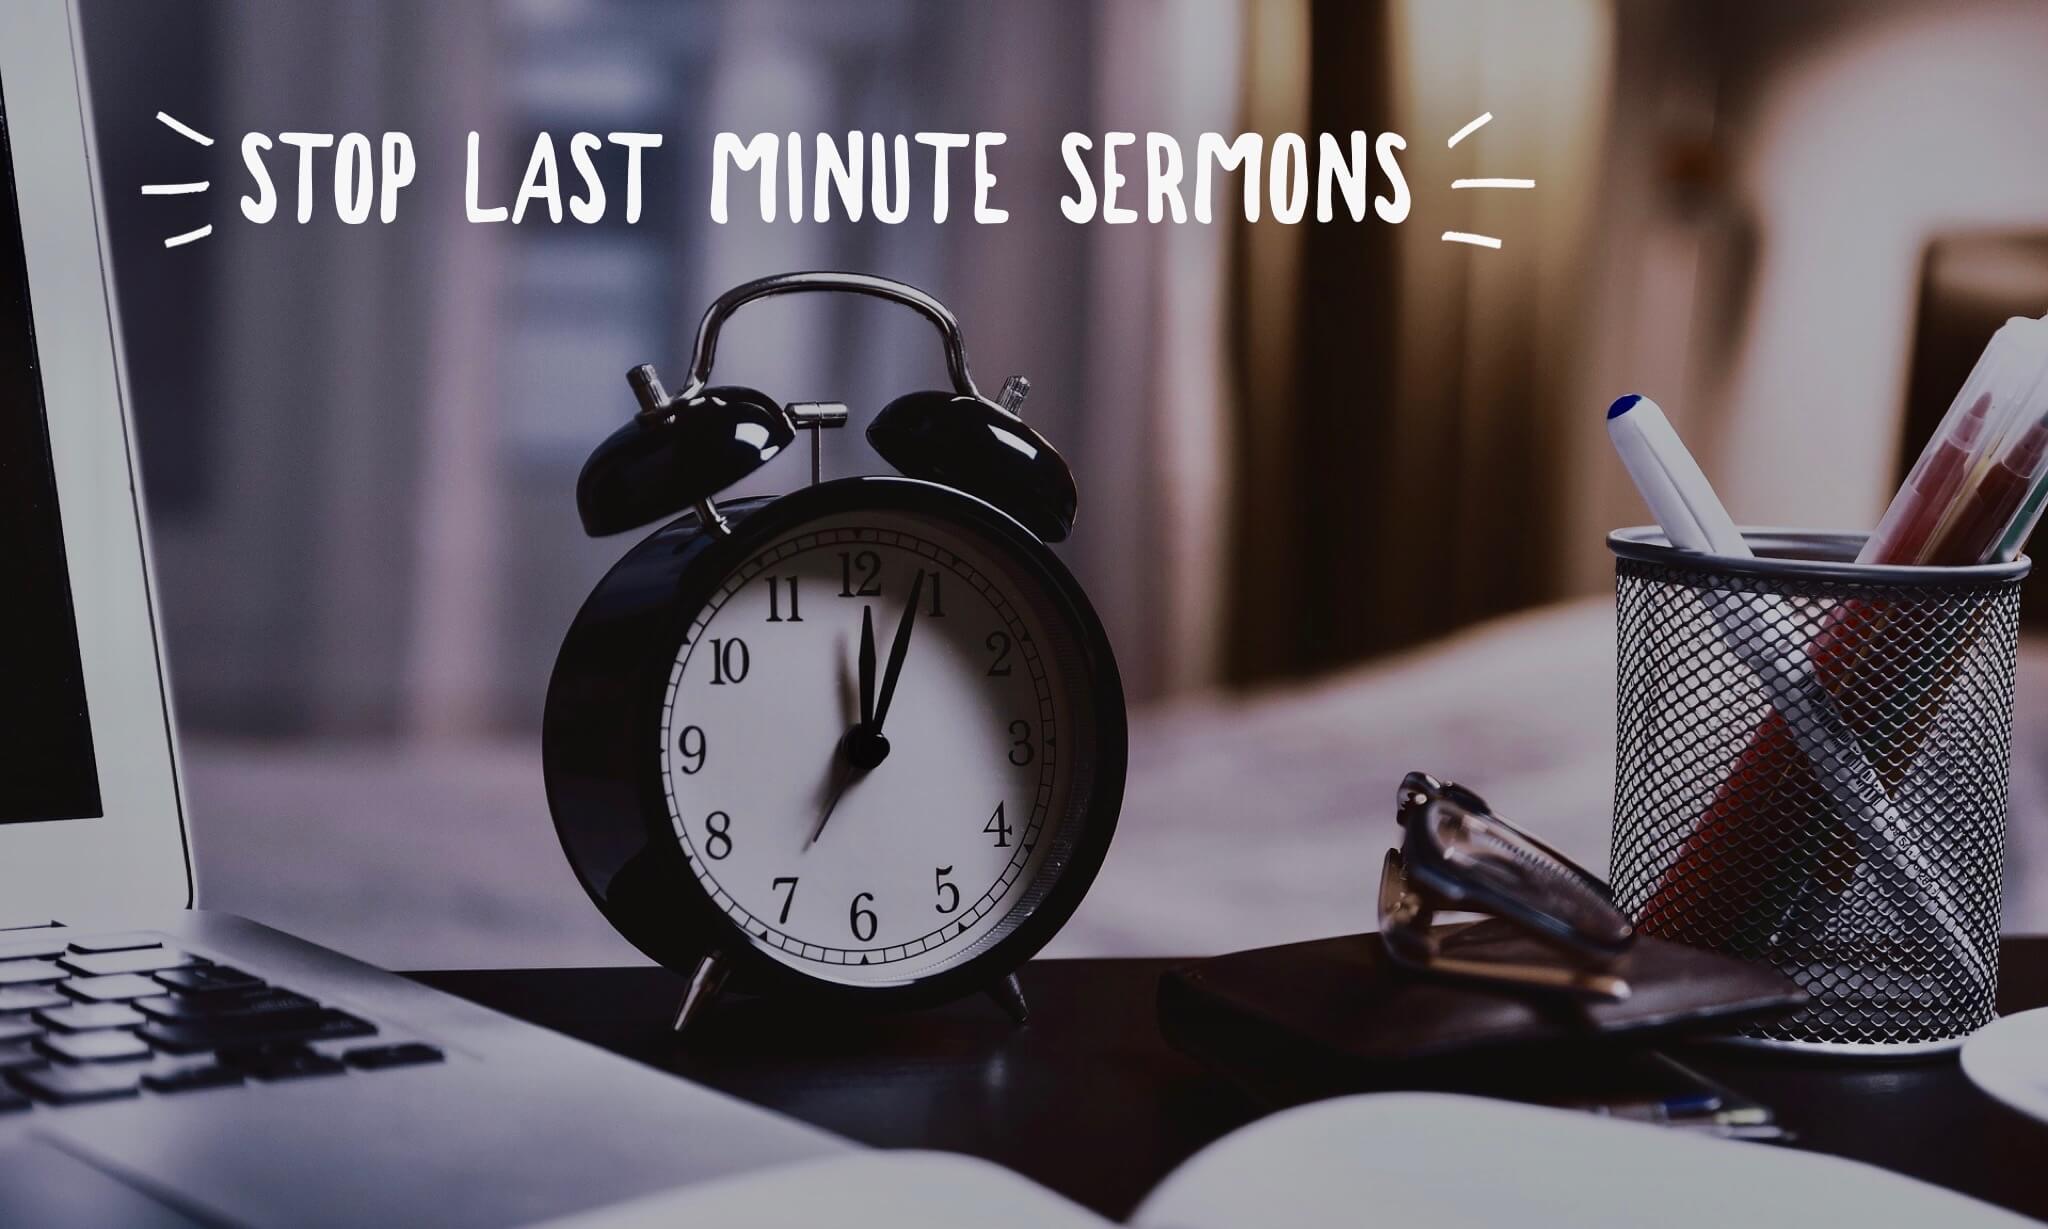 You Need to Stop Last Minute Sermons